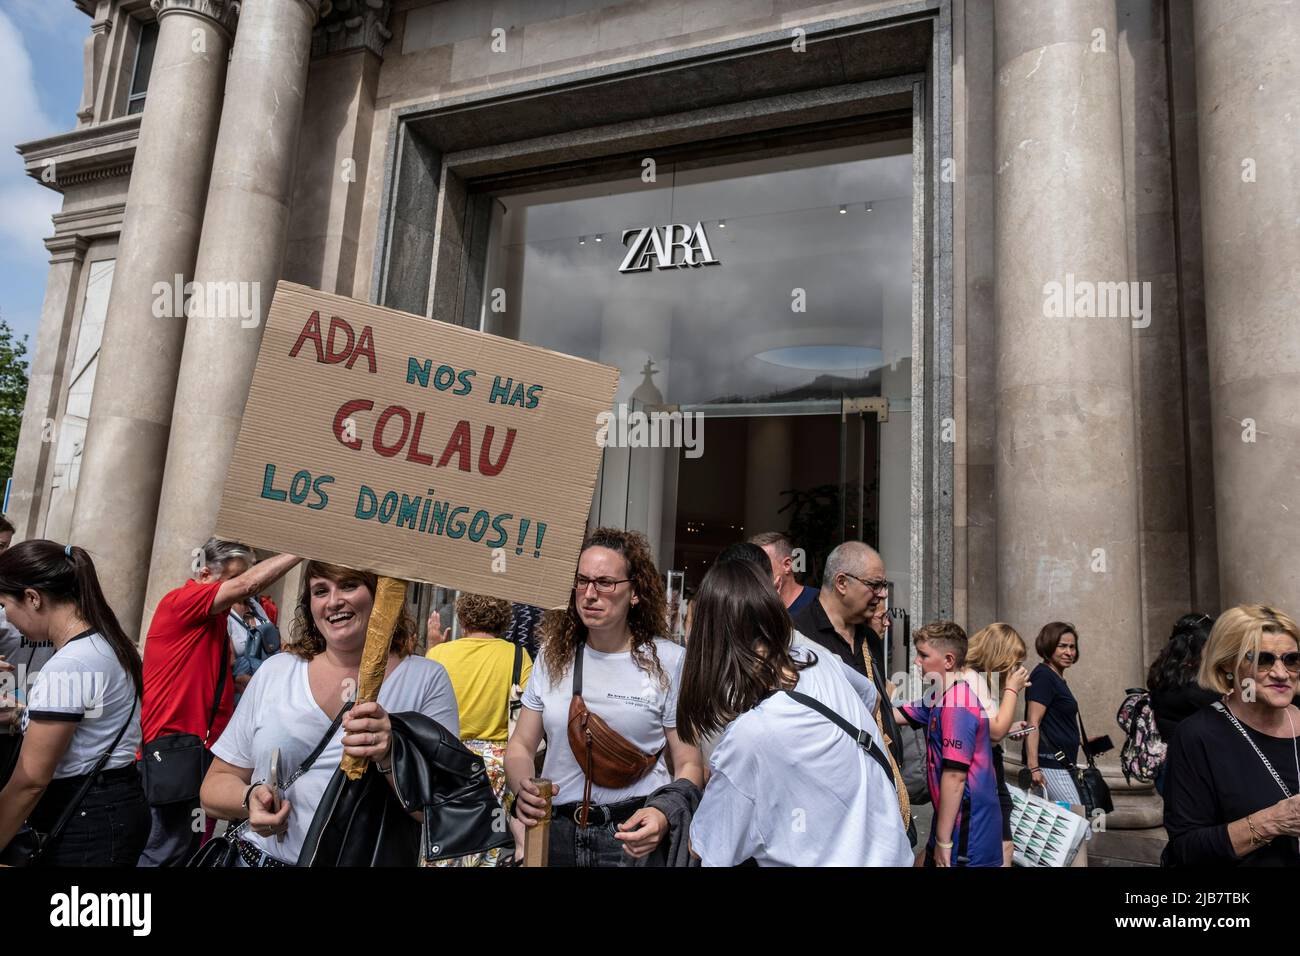 A demonstrator is seen in front of the Zara door holding a placard accusing  Mayor Ada Colau of having ratified the new business hours for Sundays  during the demonstration. Shouting 